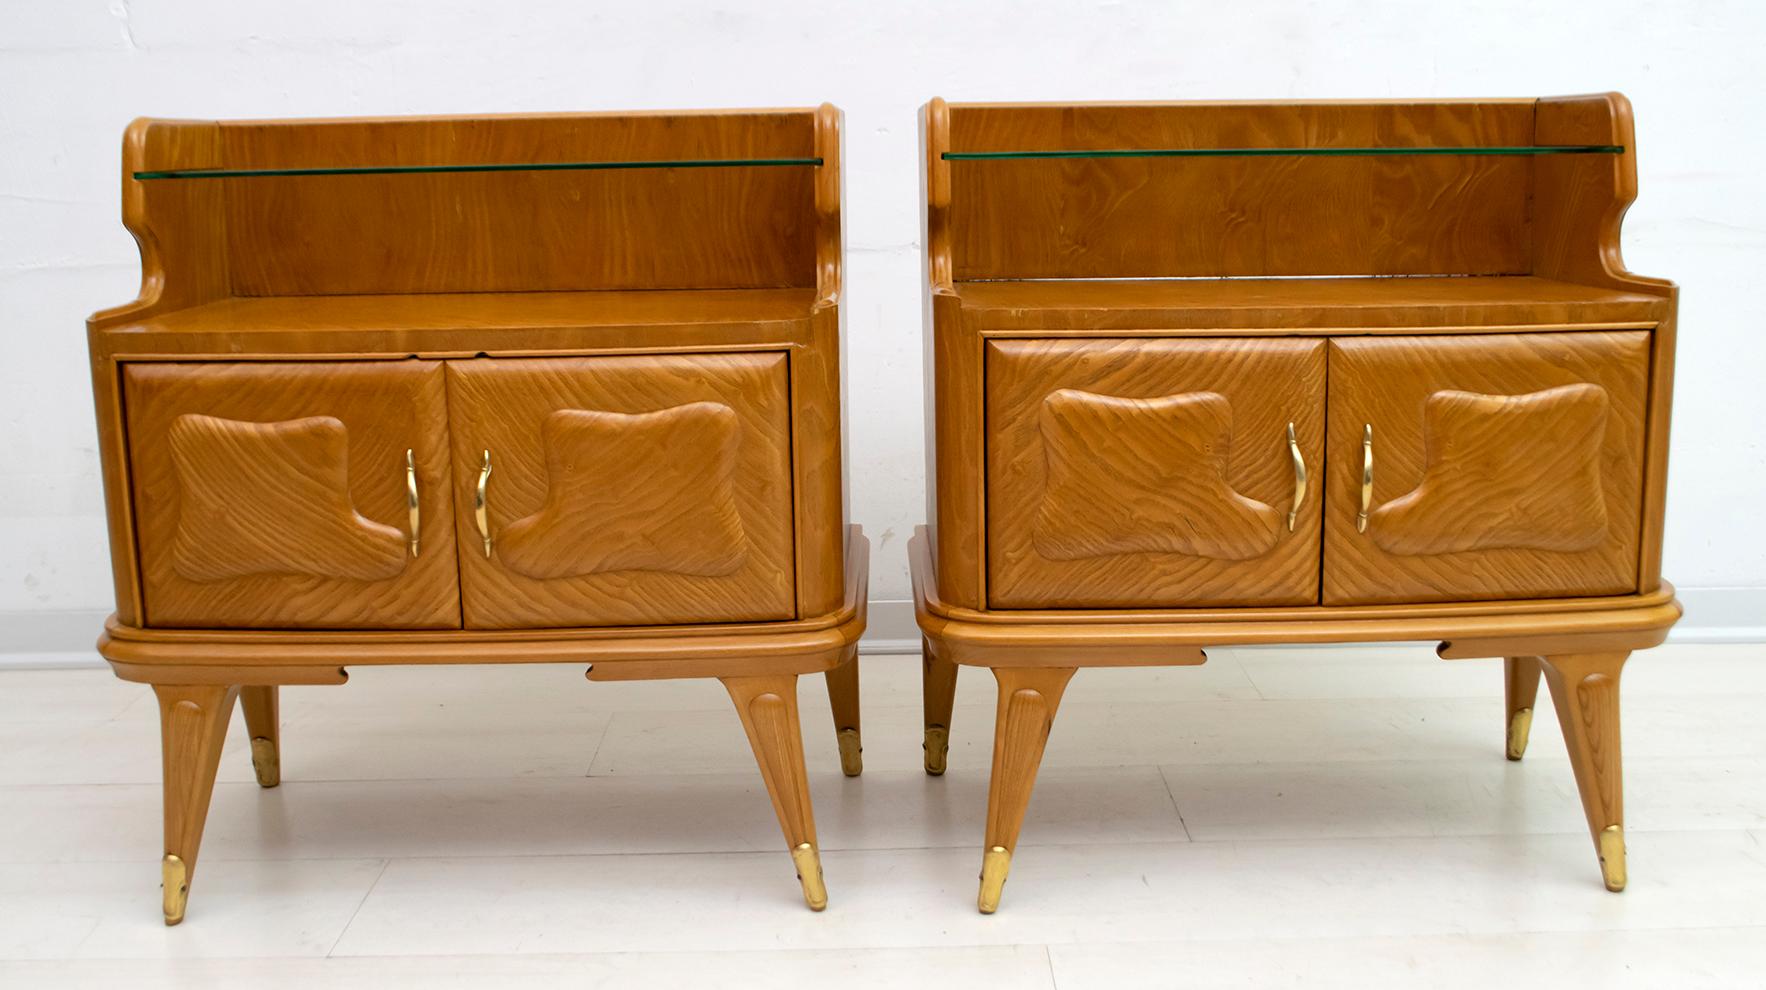 Pair of 1950s Italian nightstands, in ash, glass top and brass details. The bedside tables have been restored and polished with shellac.